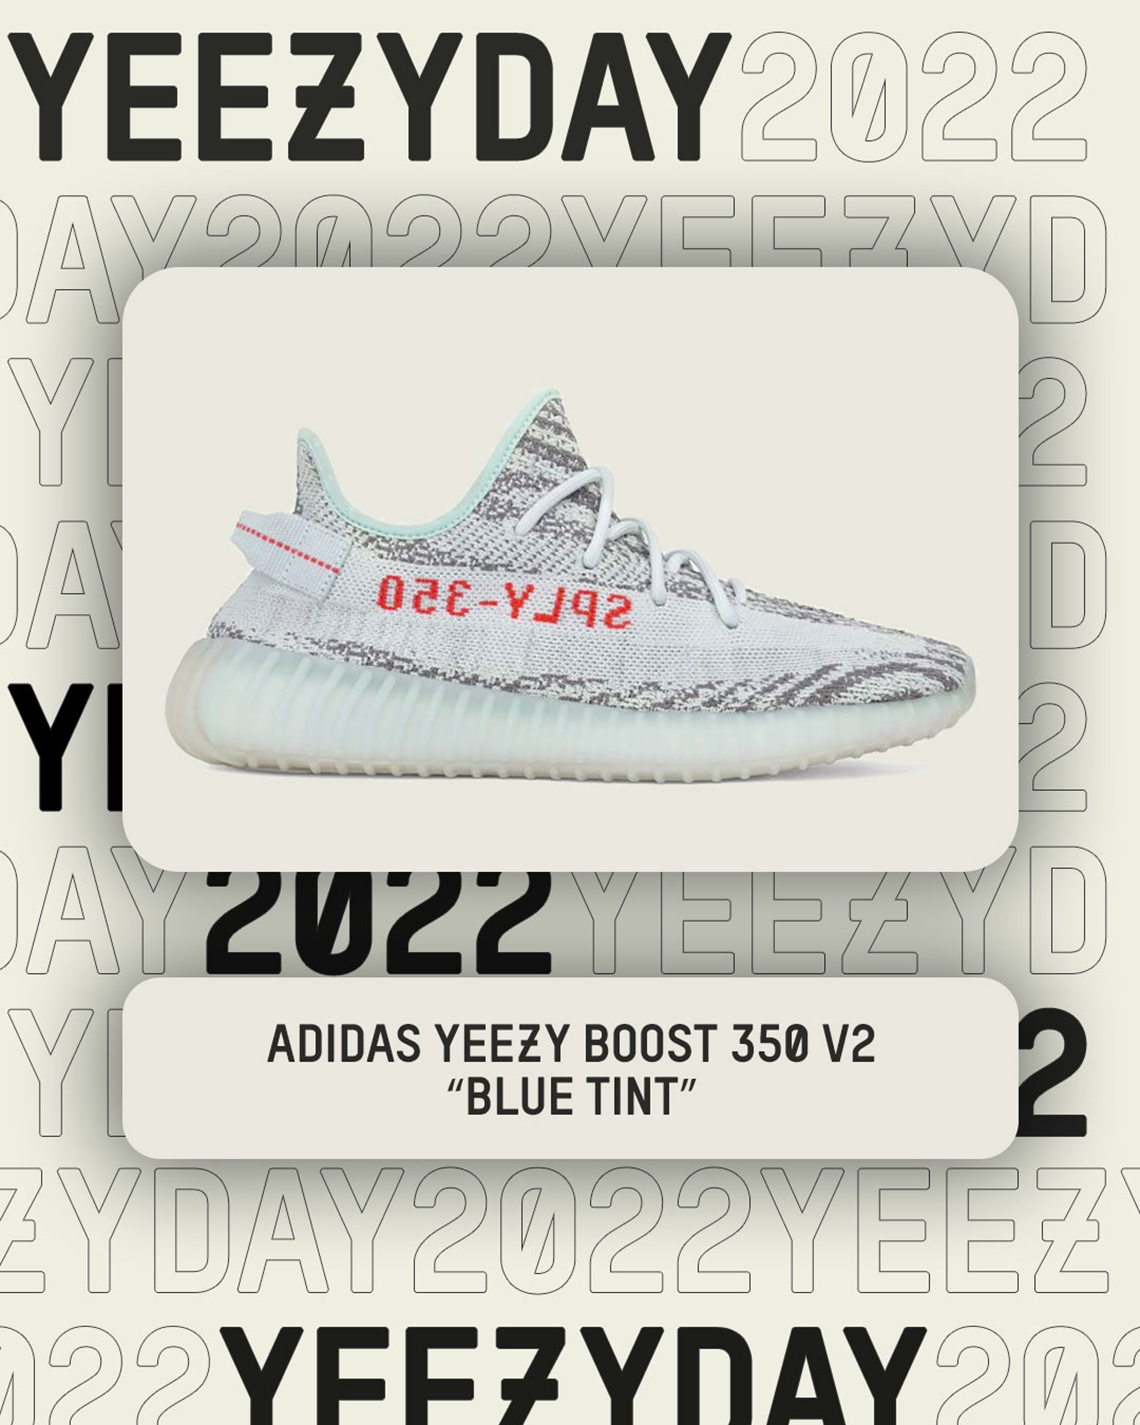 Yeezy Day 2022 Yeezy Boost 350 V2 Blue Tint